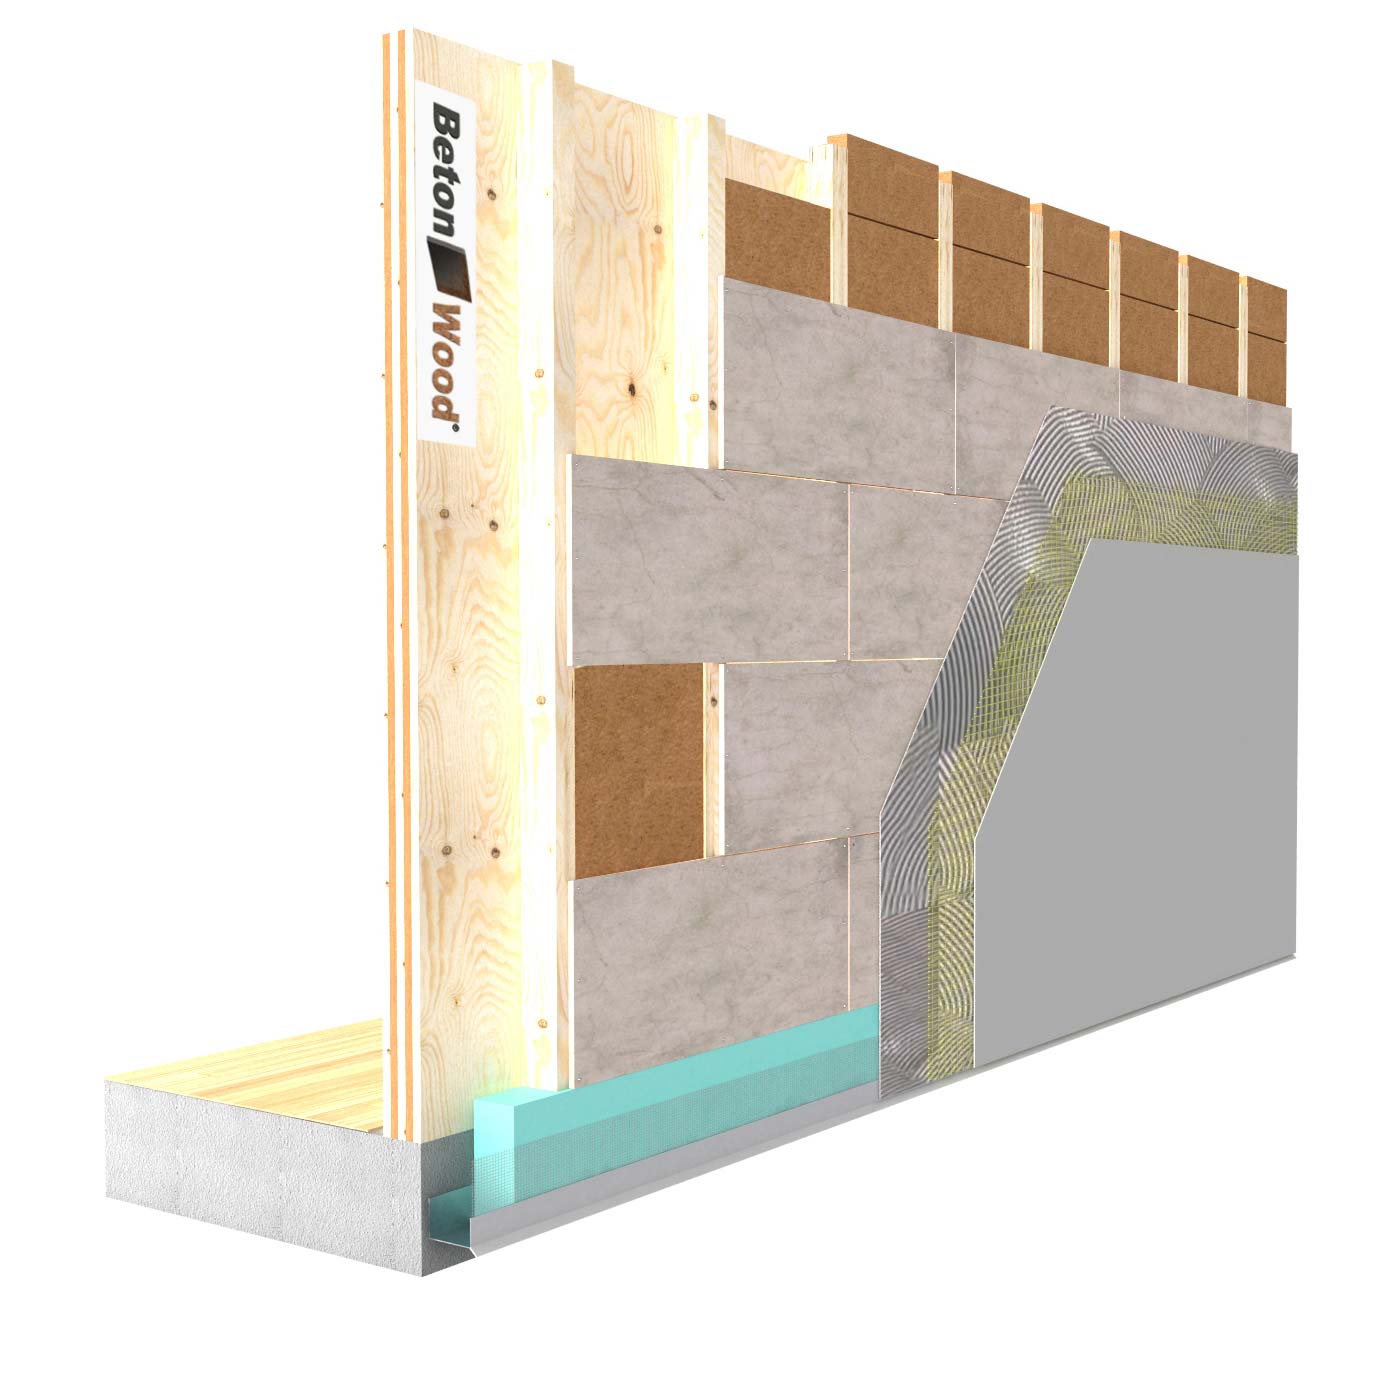 External insulation system with Therm SD fiber wood on wooden walls